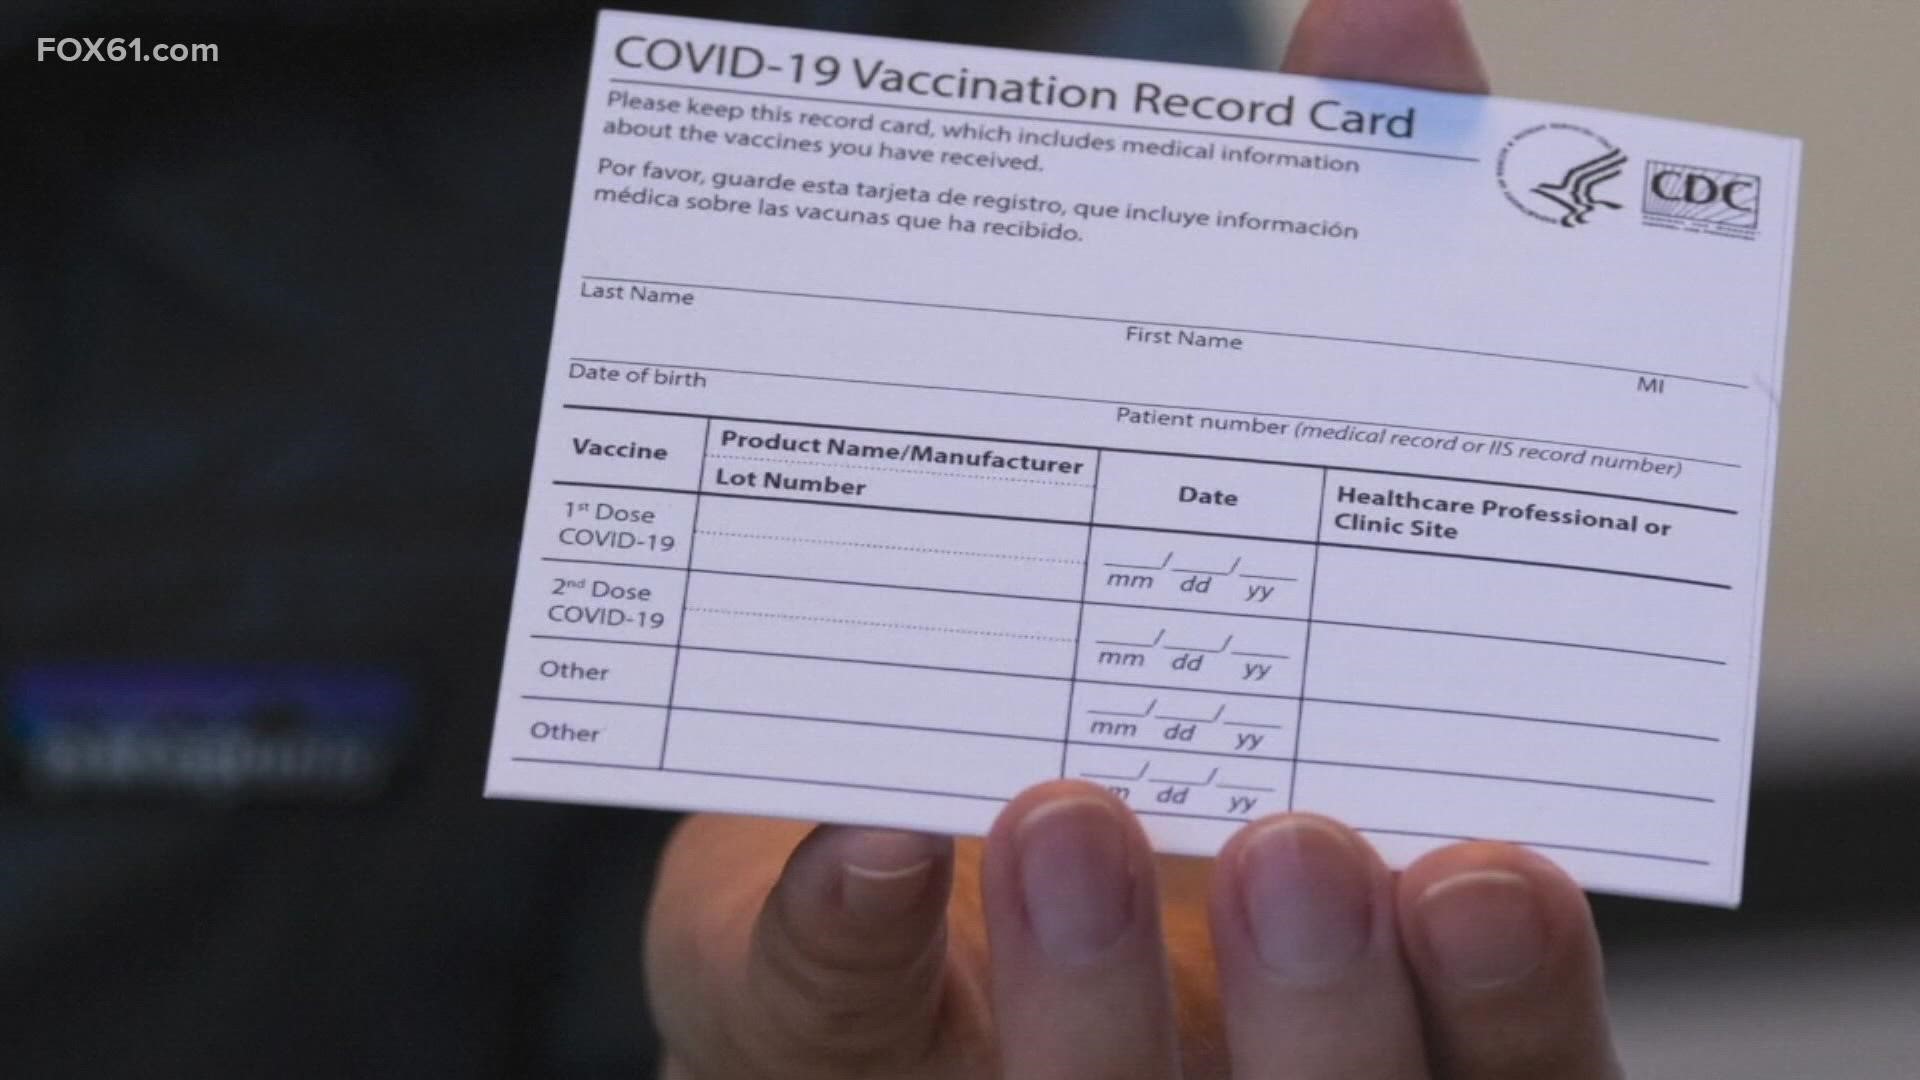 The school said if students fail to show proof of vaccination, they will face a weekly fine, COVID-19 testing, and other penalties.